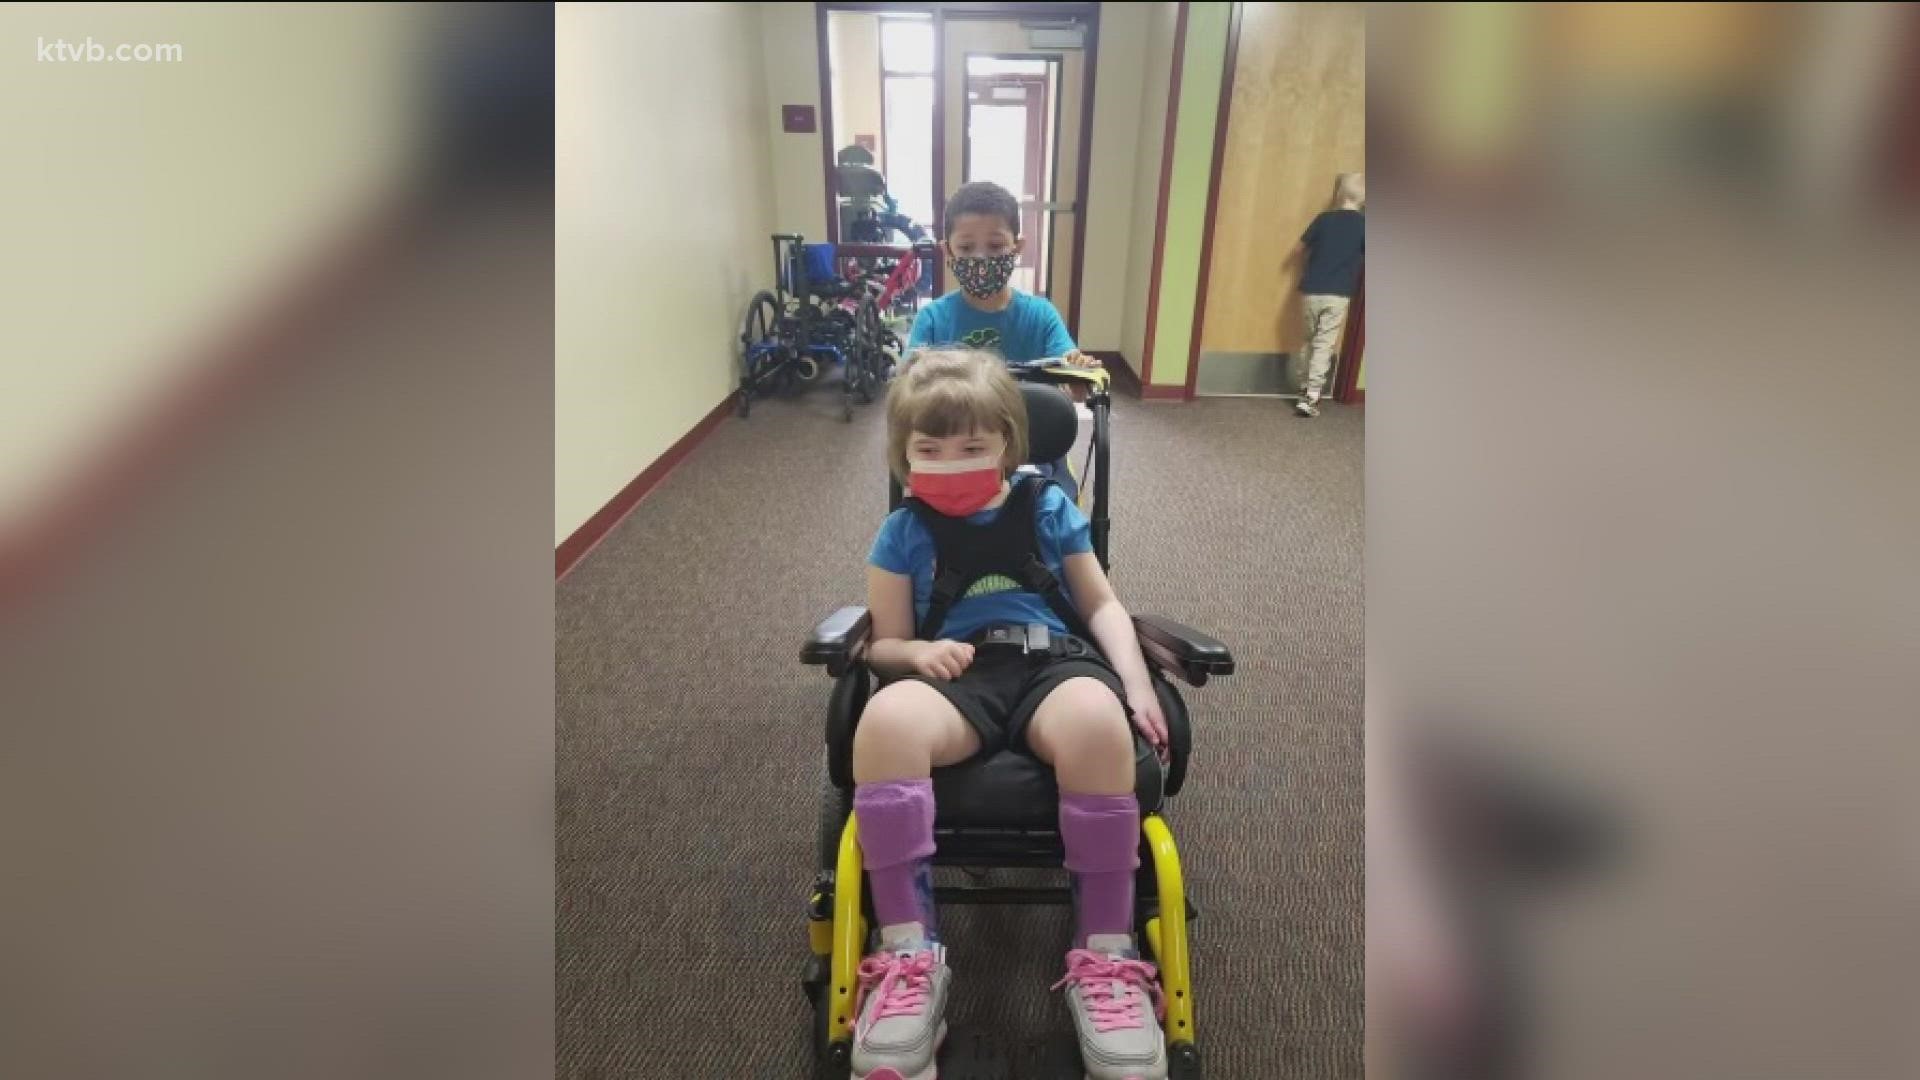 Emma Case has Rett syndrome and is non-verbal. Her mom wrote a letter to her classmates and teachers to introduce her, and to spark inclusion and acceptance.